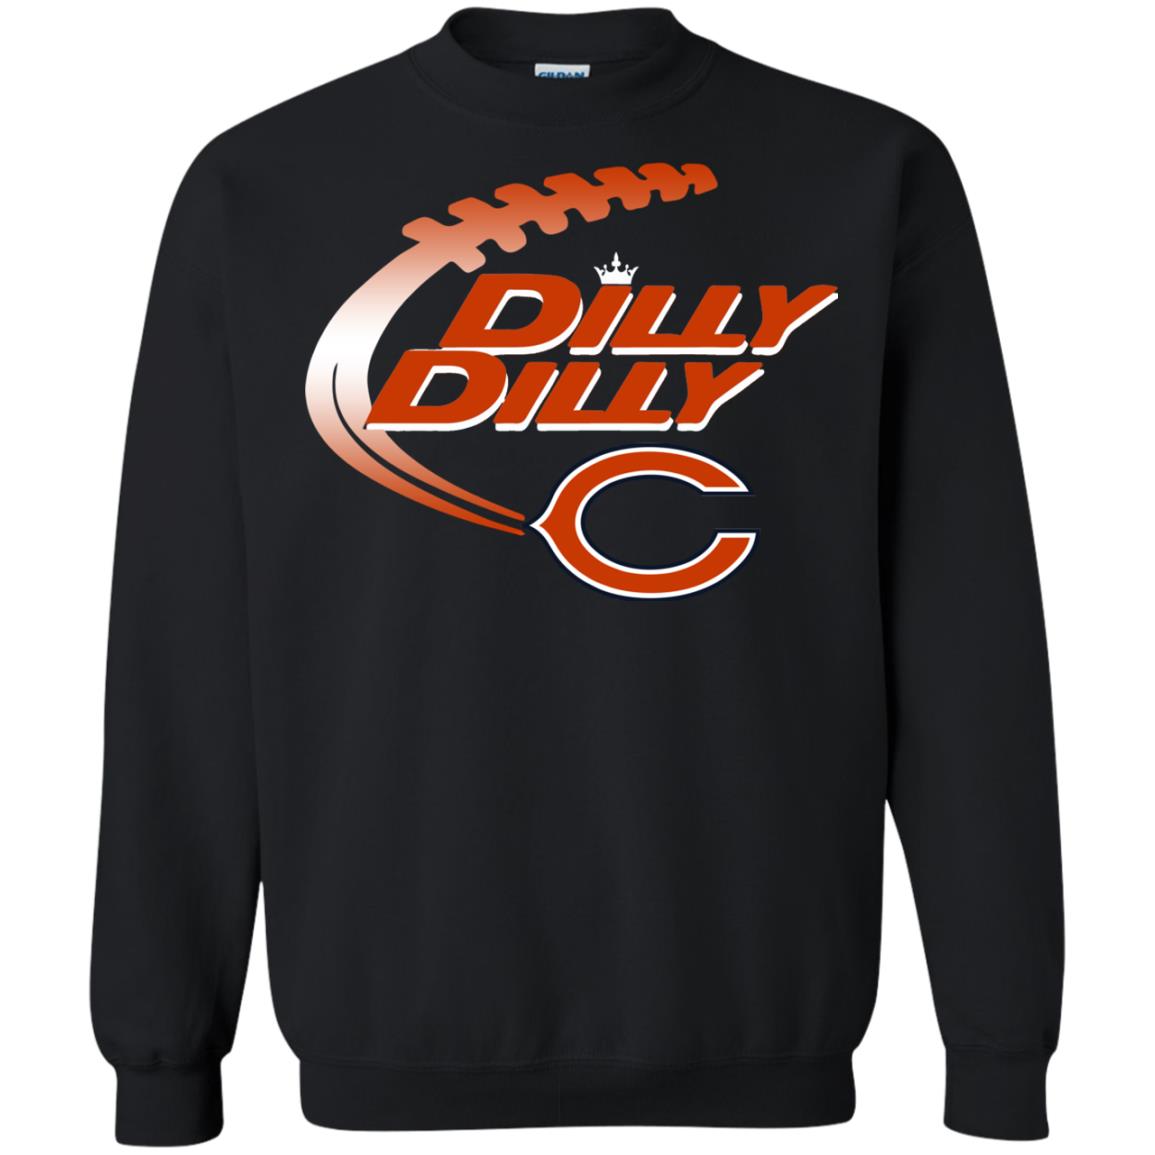 Dilly Dilly Chicago Bears Shirt 